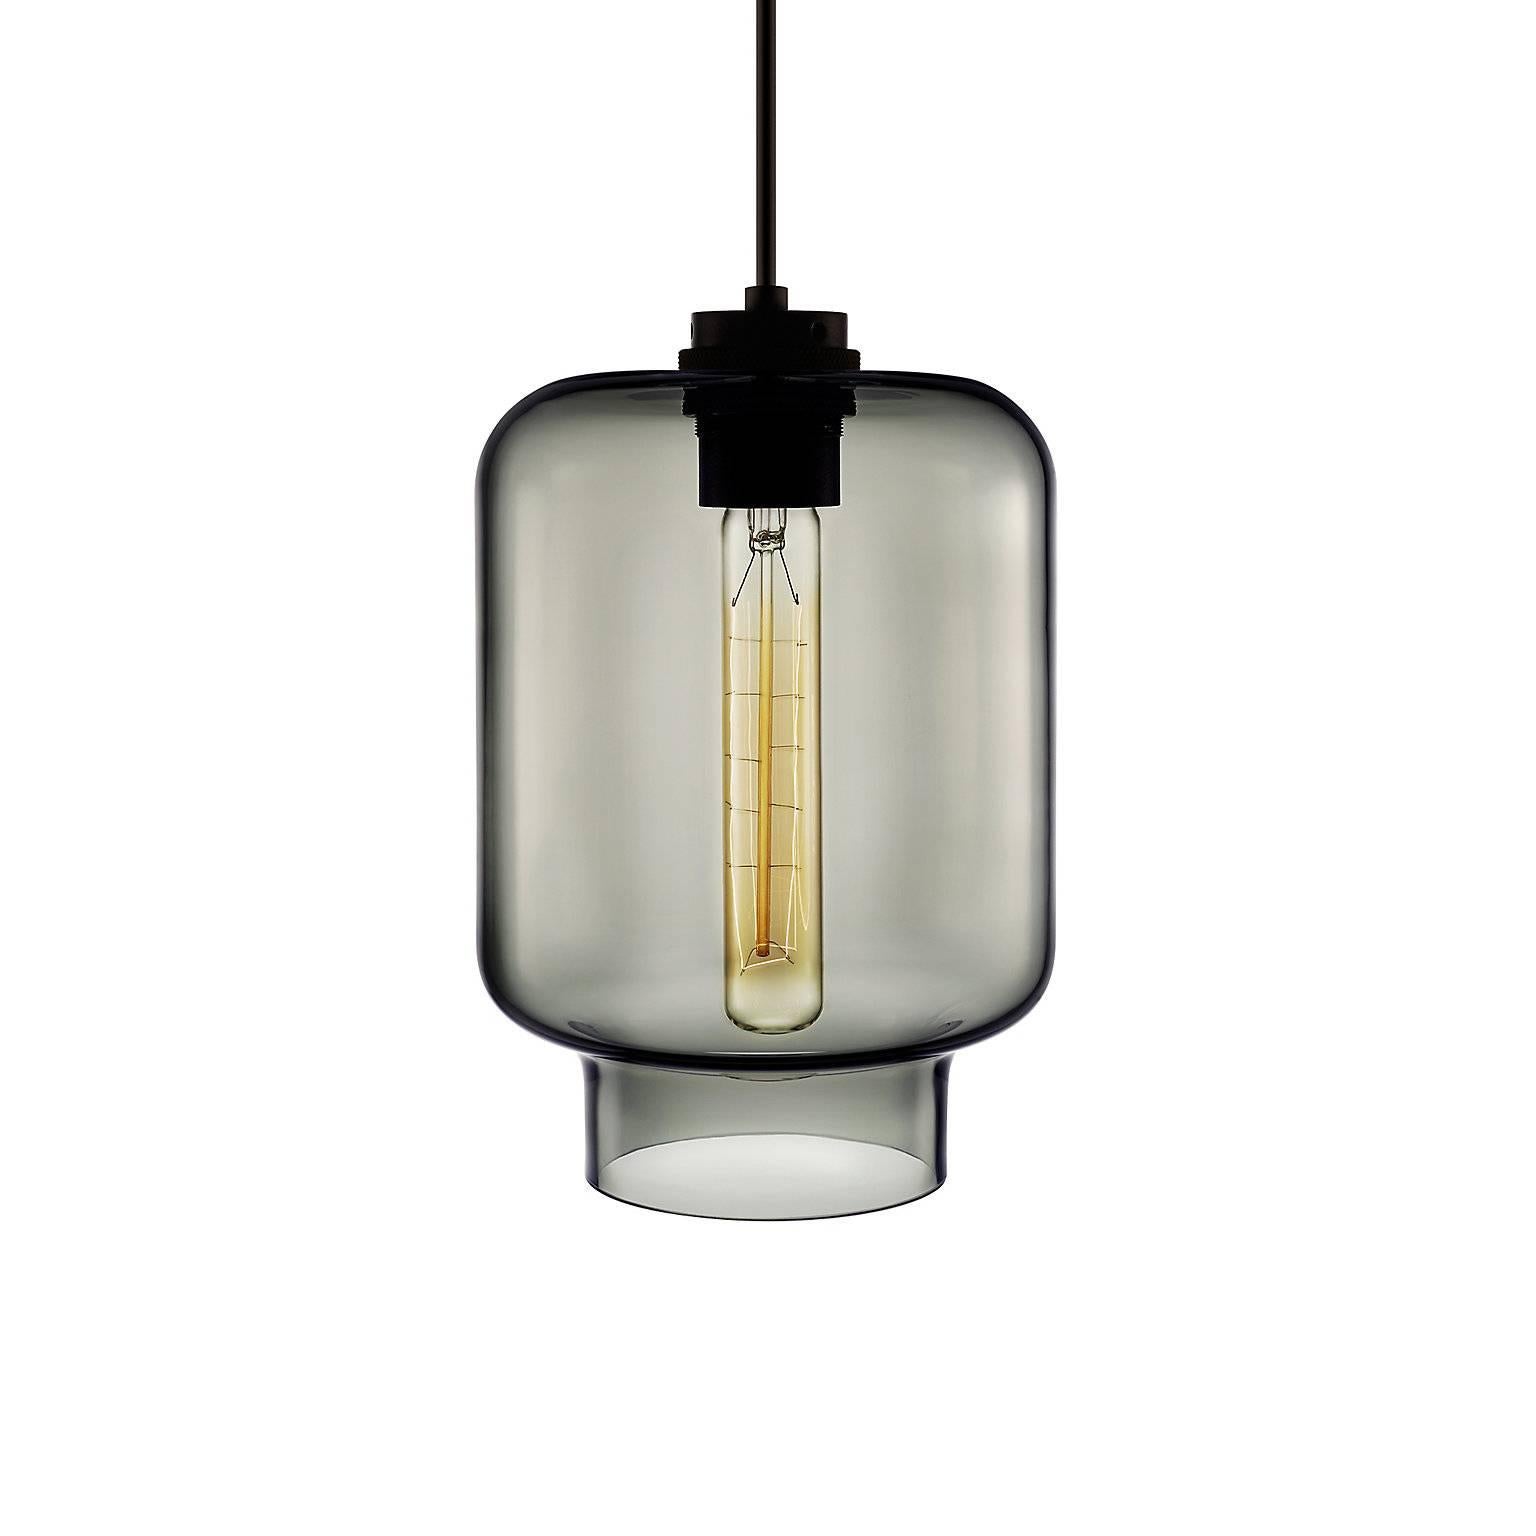 Unique to the Crystalline series, the Calla pendant adds a softness to the grouping with its delicate frame. Pairs easily with the Delinea, Axia, and Trove pendants that also comprise the Crystalline series. Every single glass pendant light that